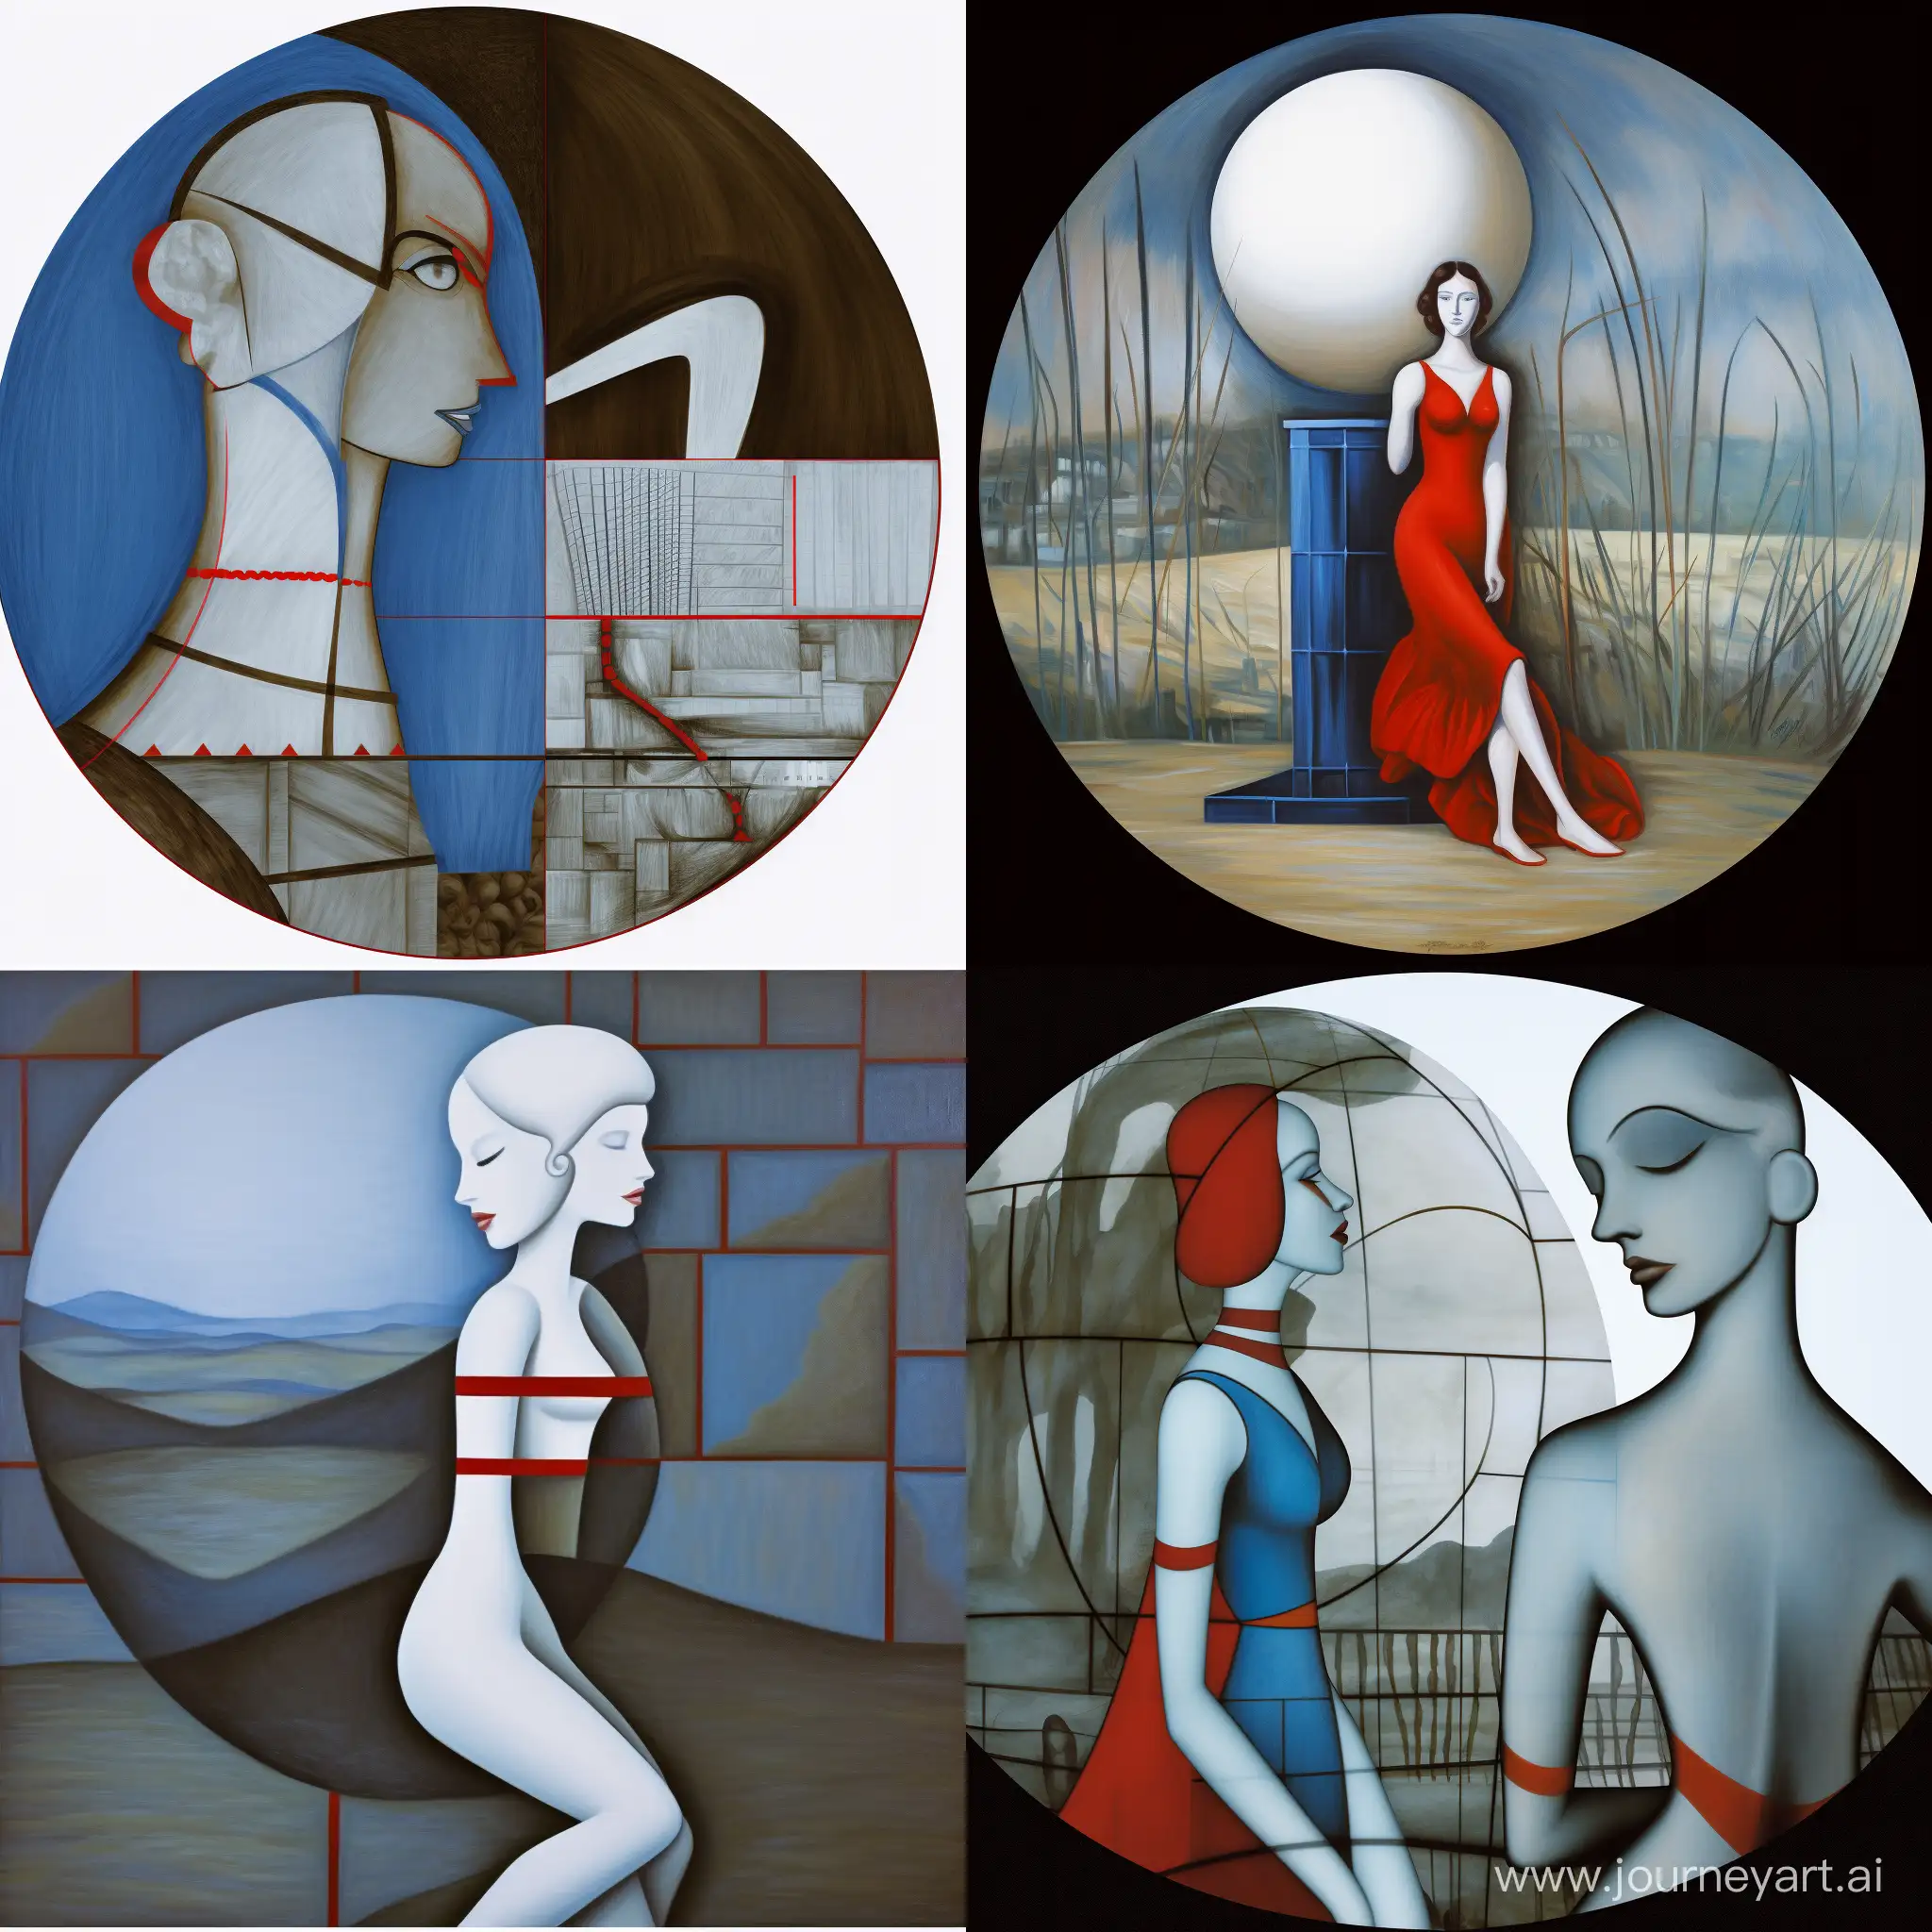 Neural-Network-Girl-on-Ball-Stylized-Recreation-of-Picassos-Girl-on-a-Ball